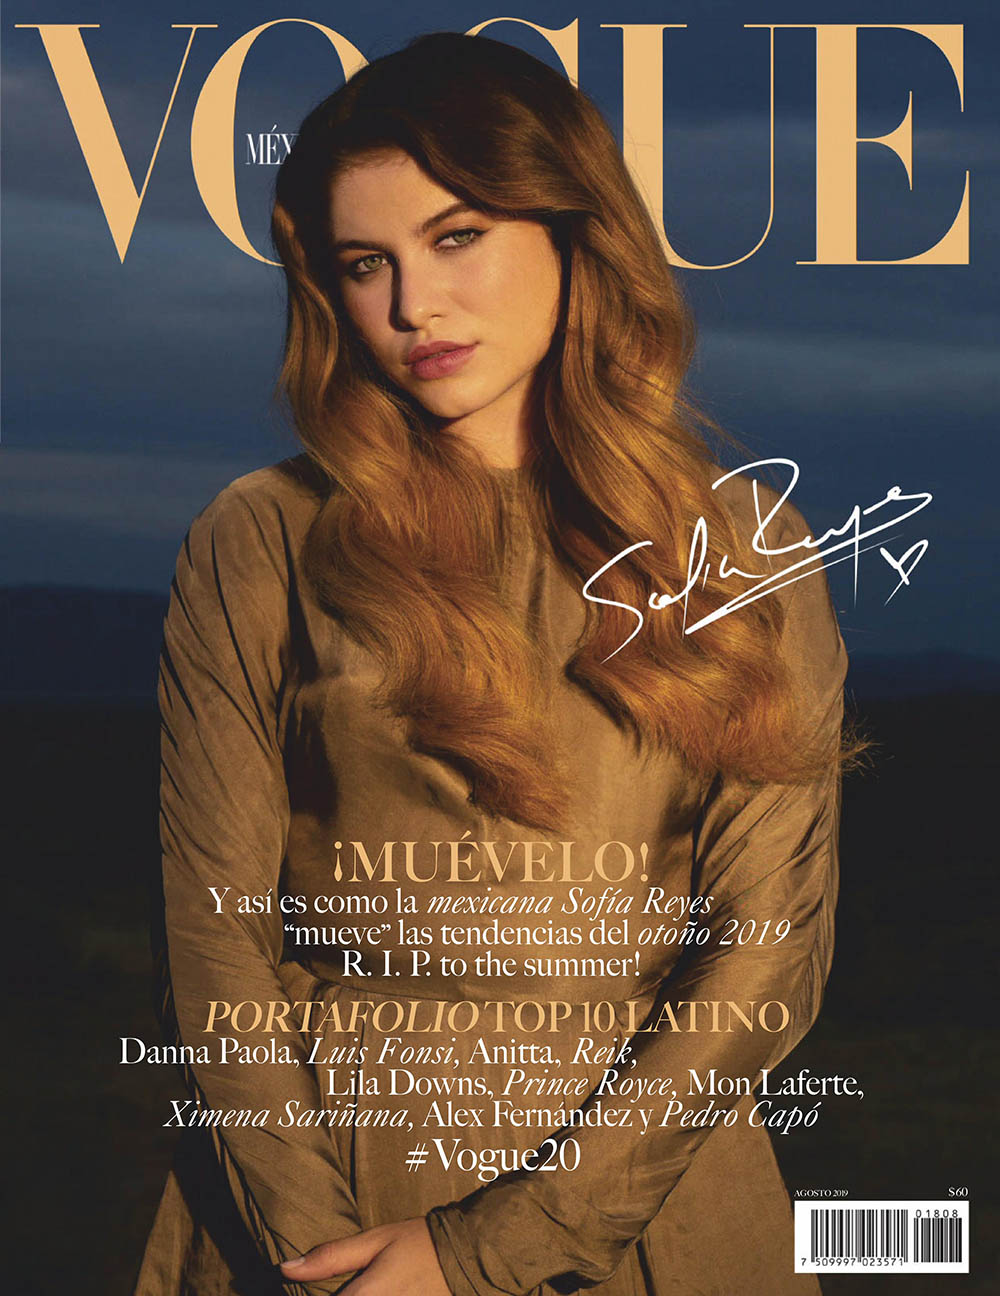 Sofía Reyes covers Vogue Mexico August 2019 by Tania Franco Klein